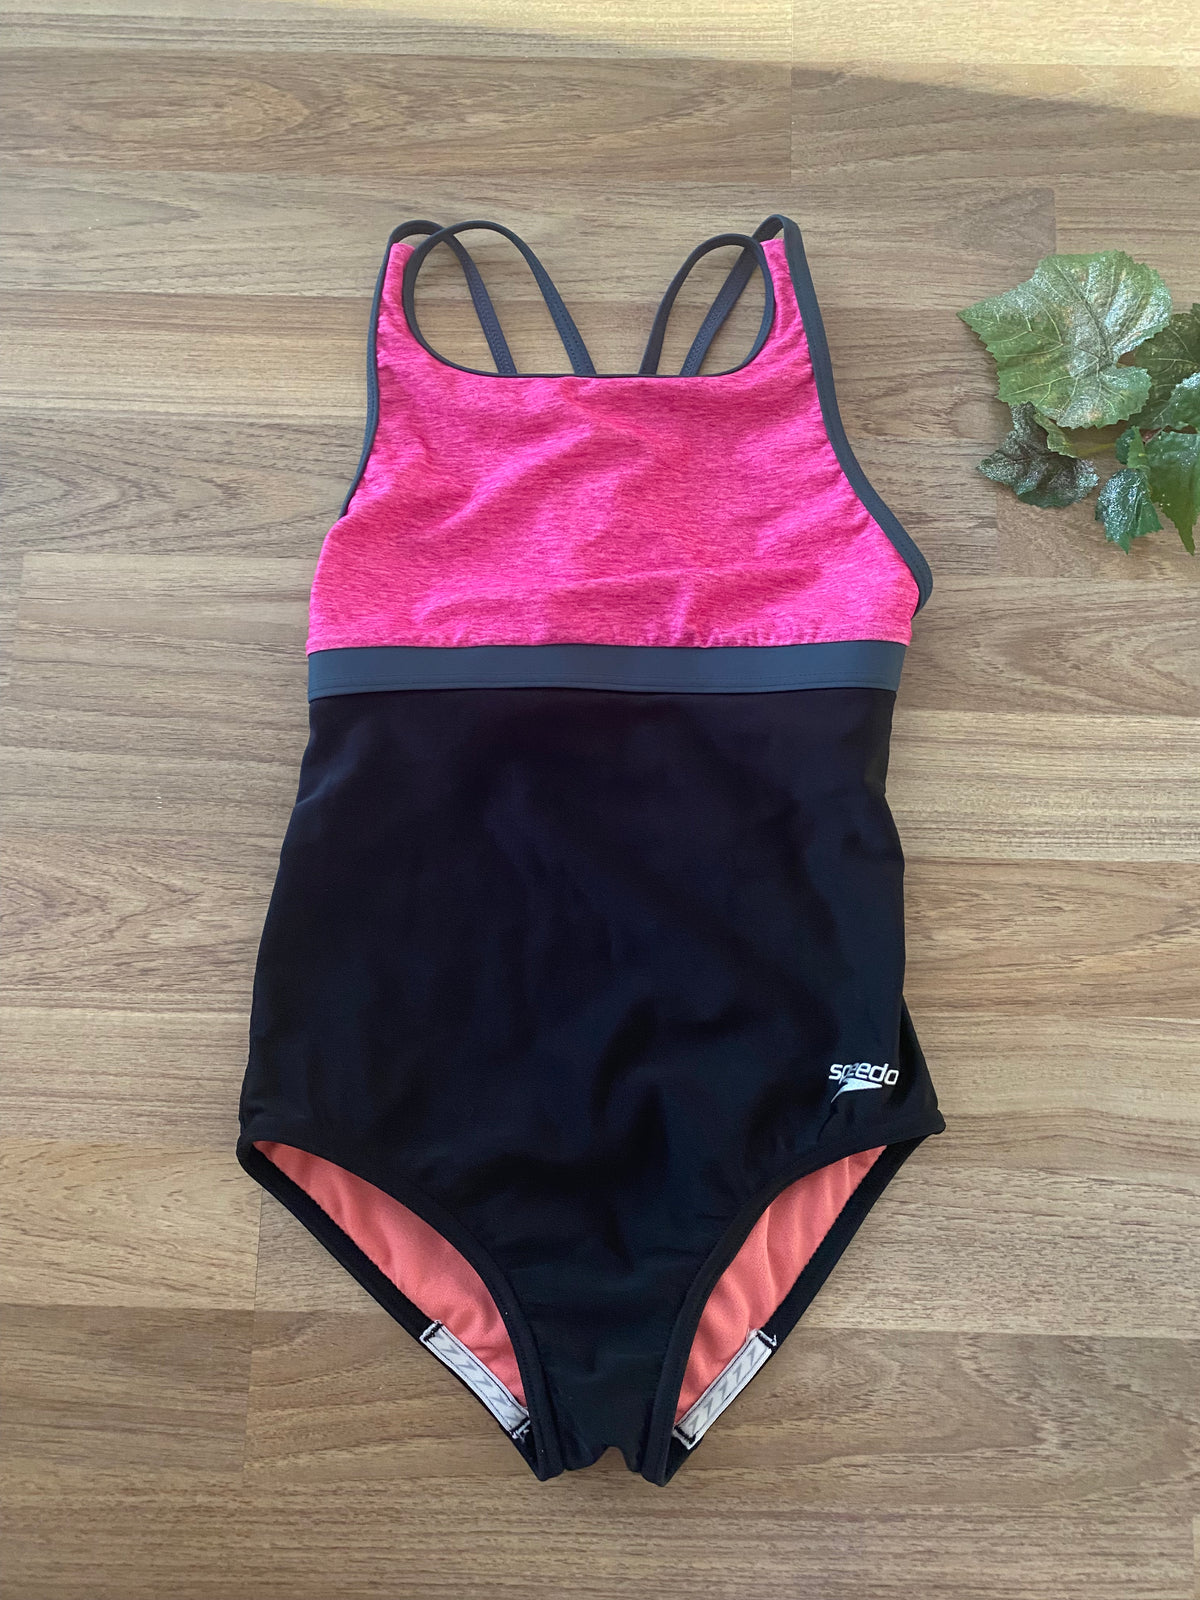 One Piece Bathing Suit (Girls Size 10)